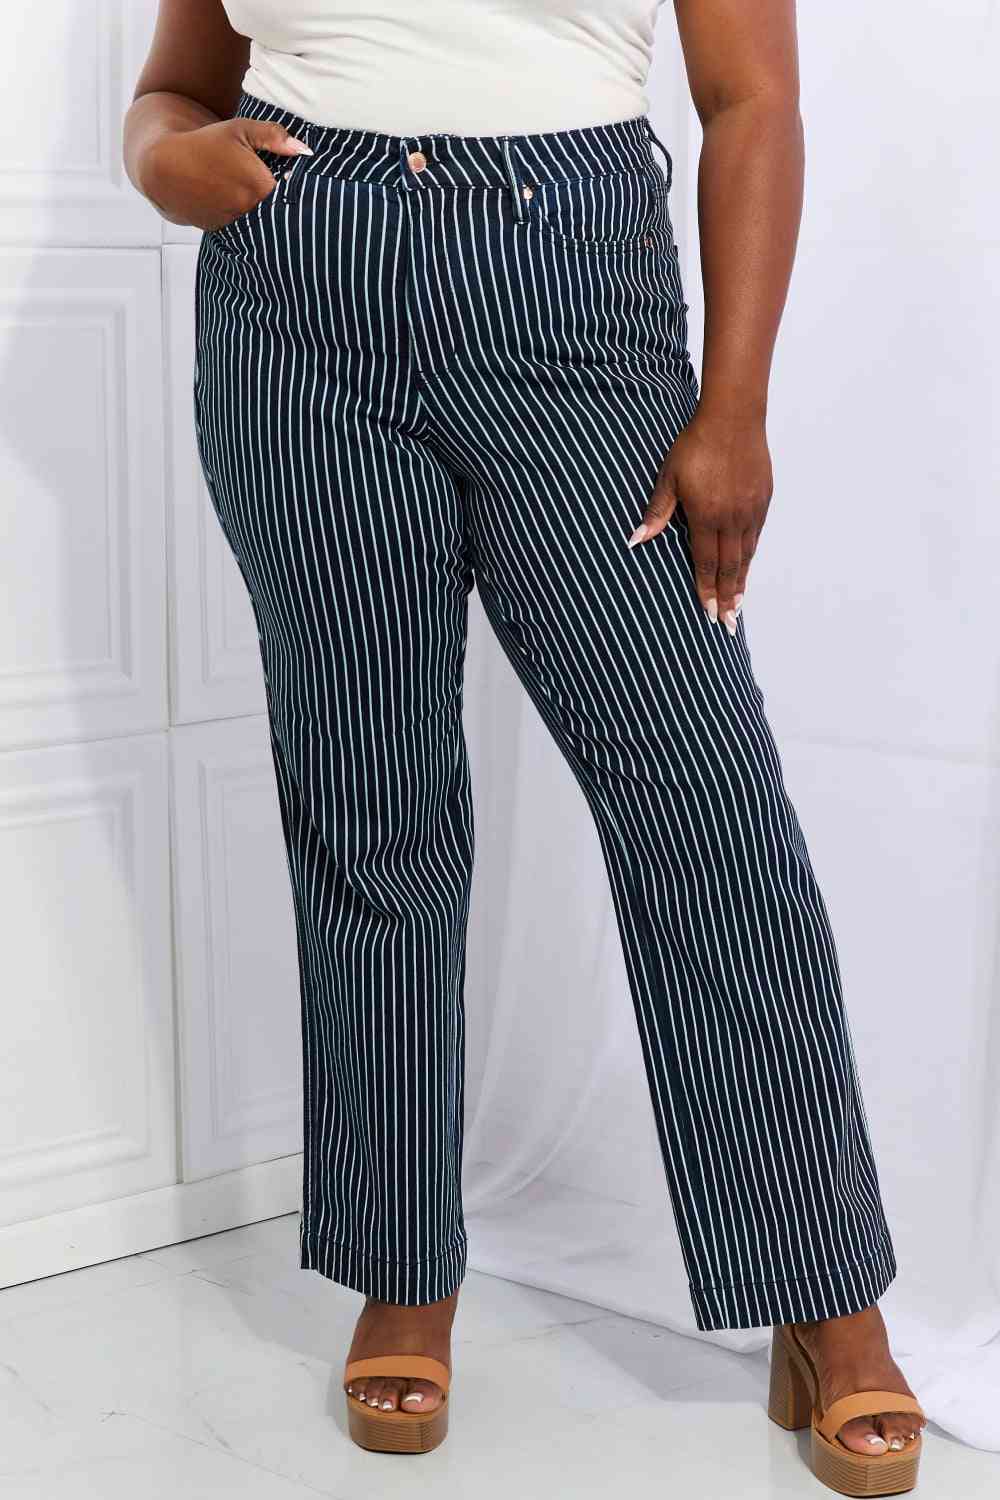 Judy Blue Cassidy Regular & Plus Size High Waisted Tummy Control Striped Straight Jeans